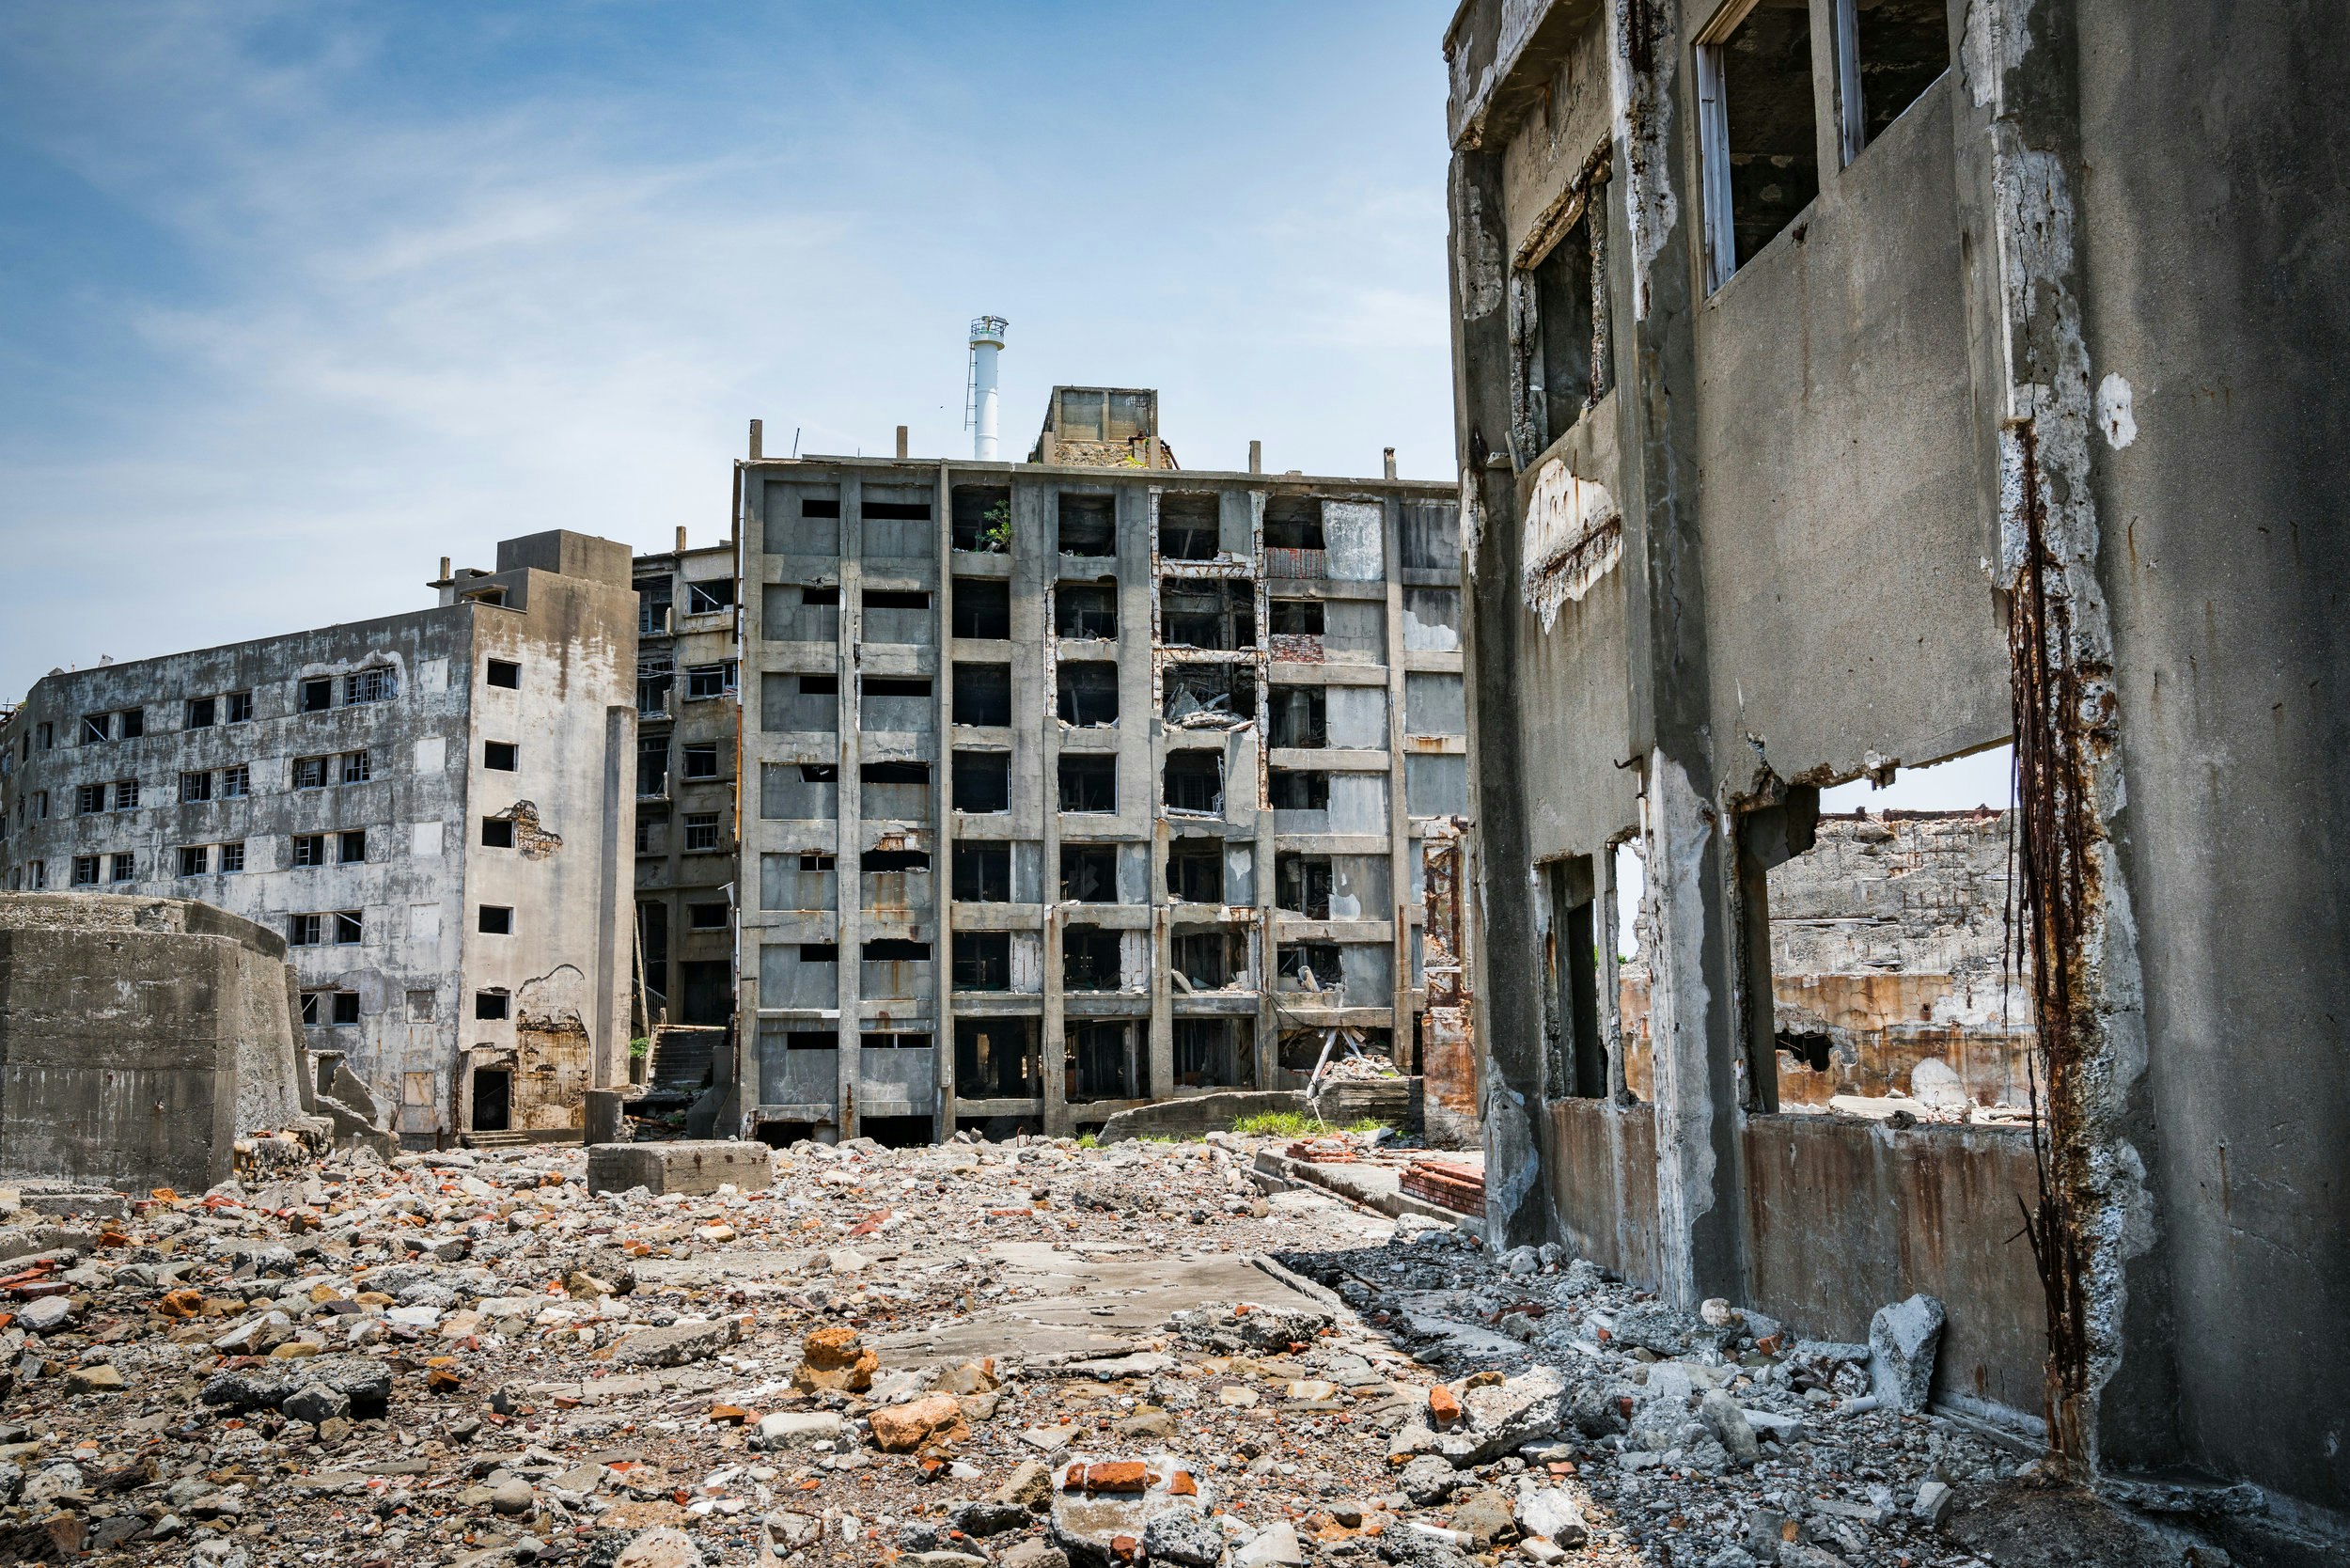 The ruins of a buildings in Hashima Island, of the coast of Japan. The ground is littered with rocks and stones. 